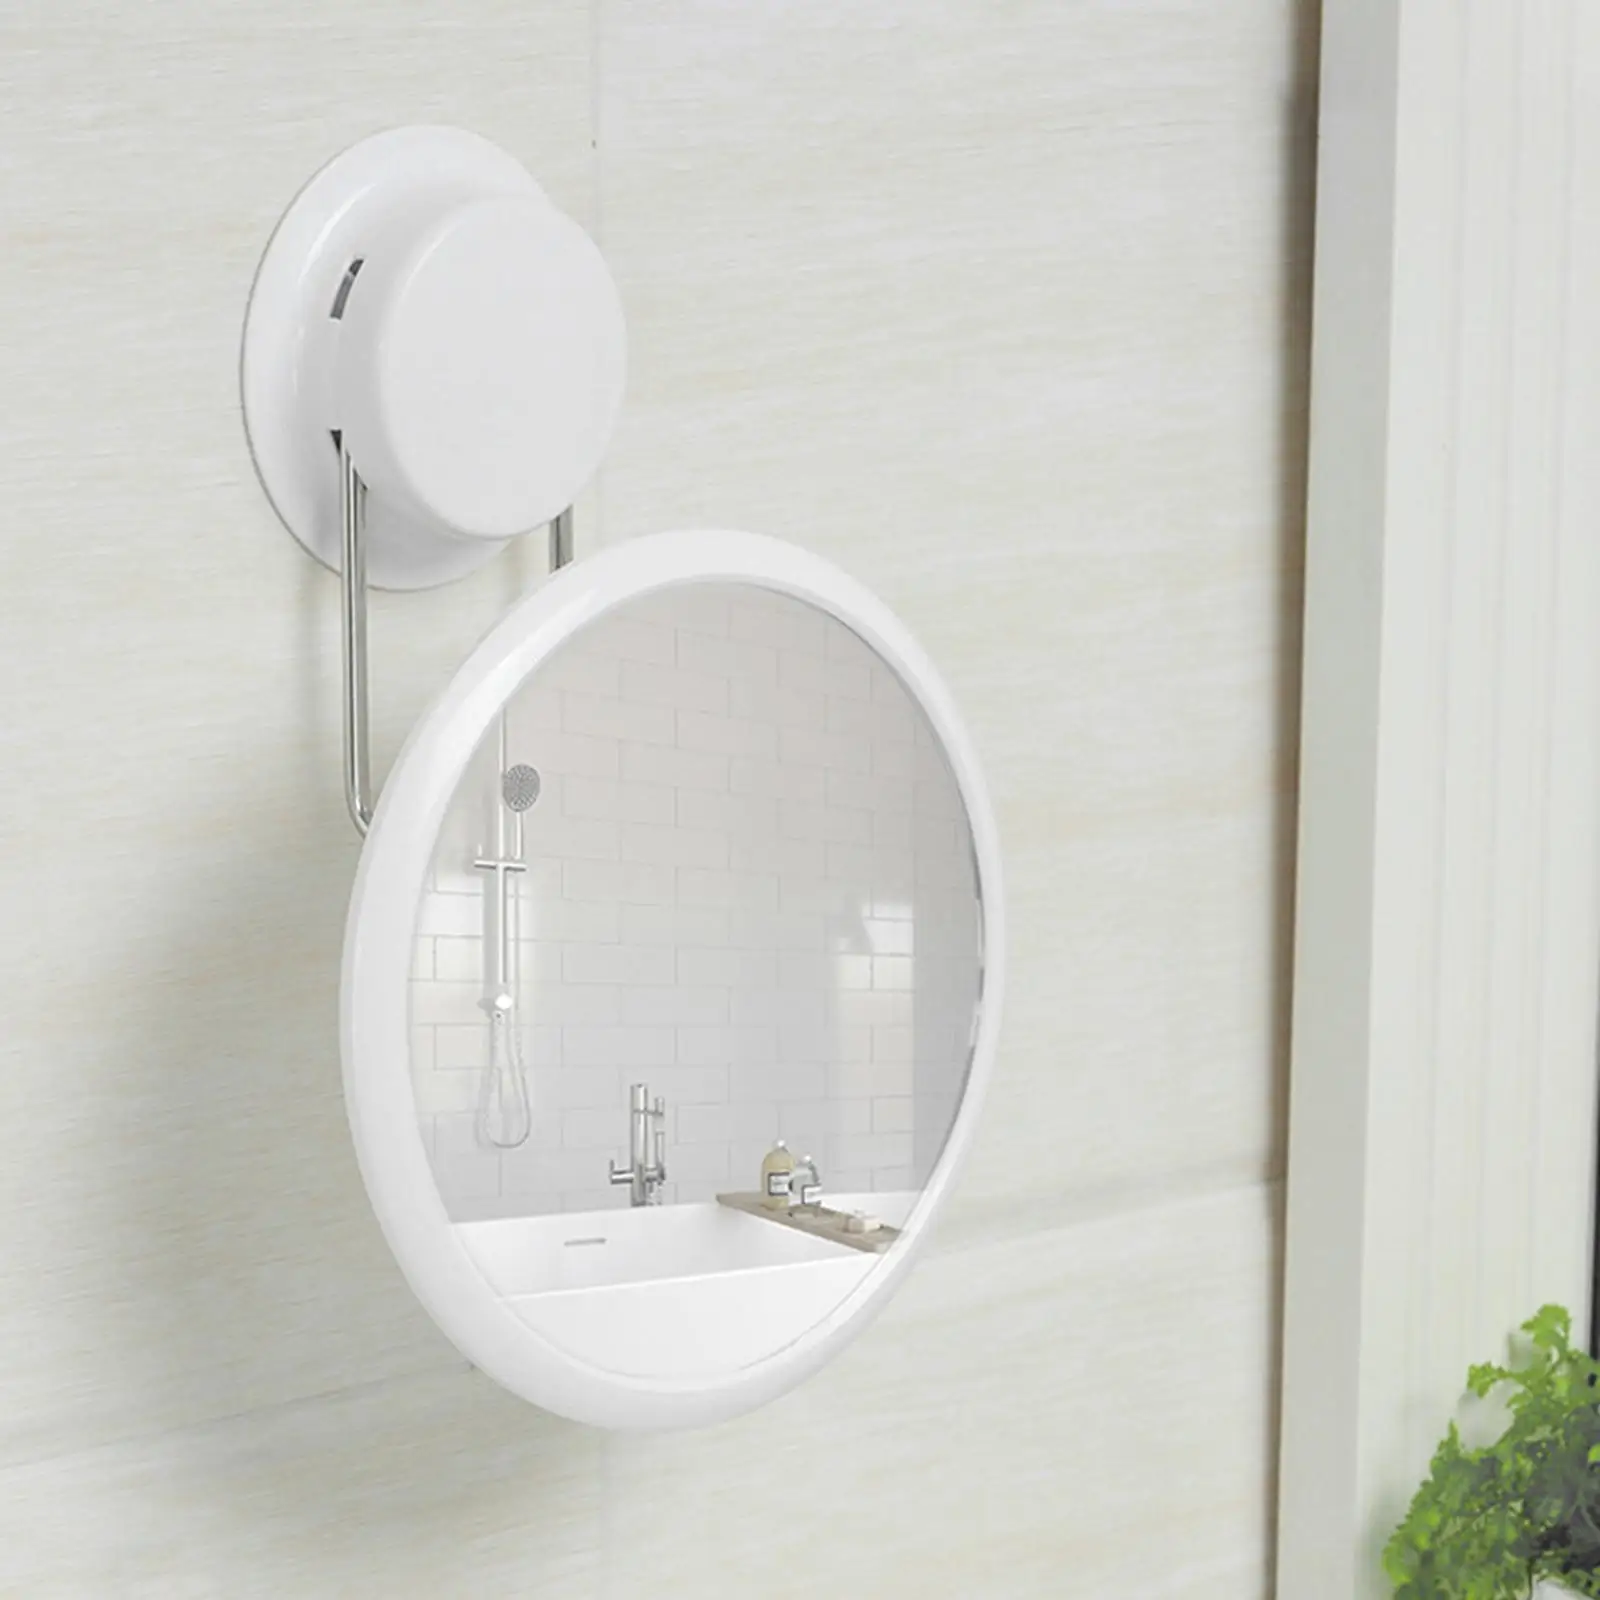 Wall Mounted Makeup Mirror Punch Free Folding Rotatable No Damage to The Wall No Drills Easy to Clean Mirror Beauty Mirror